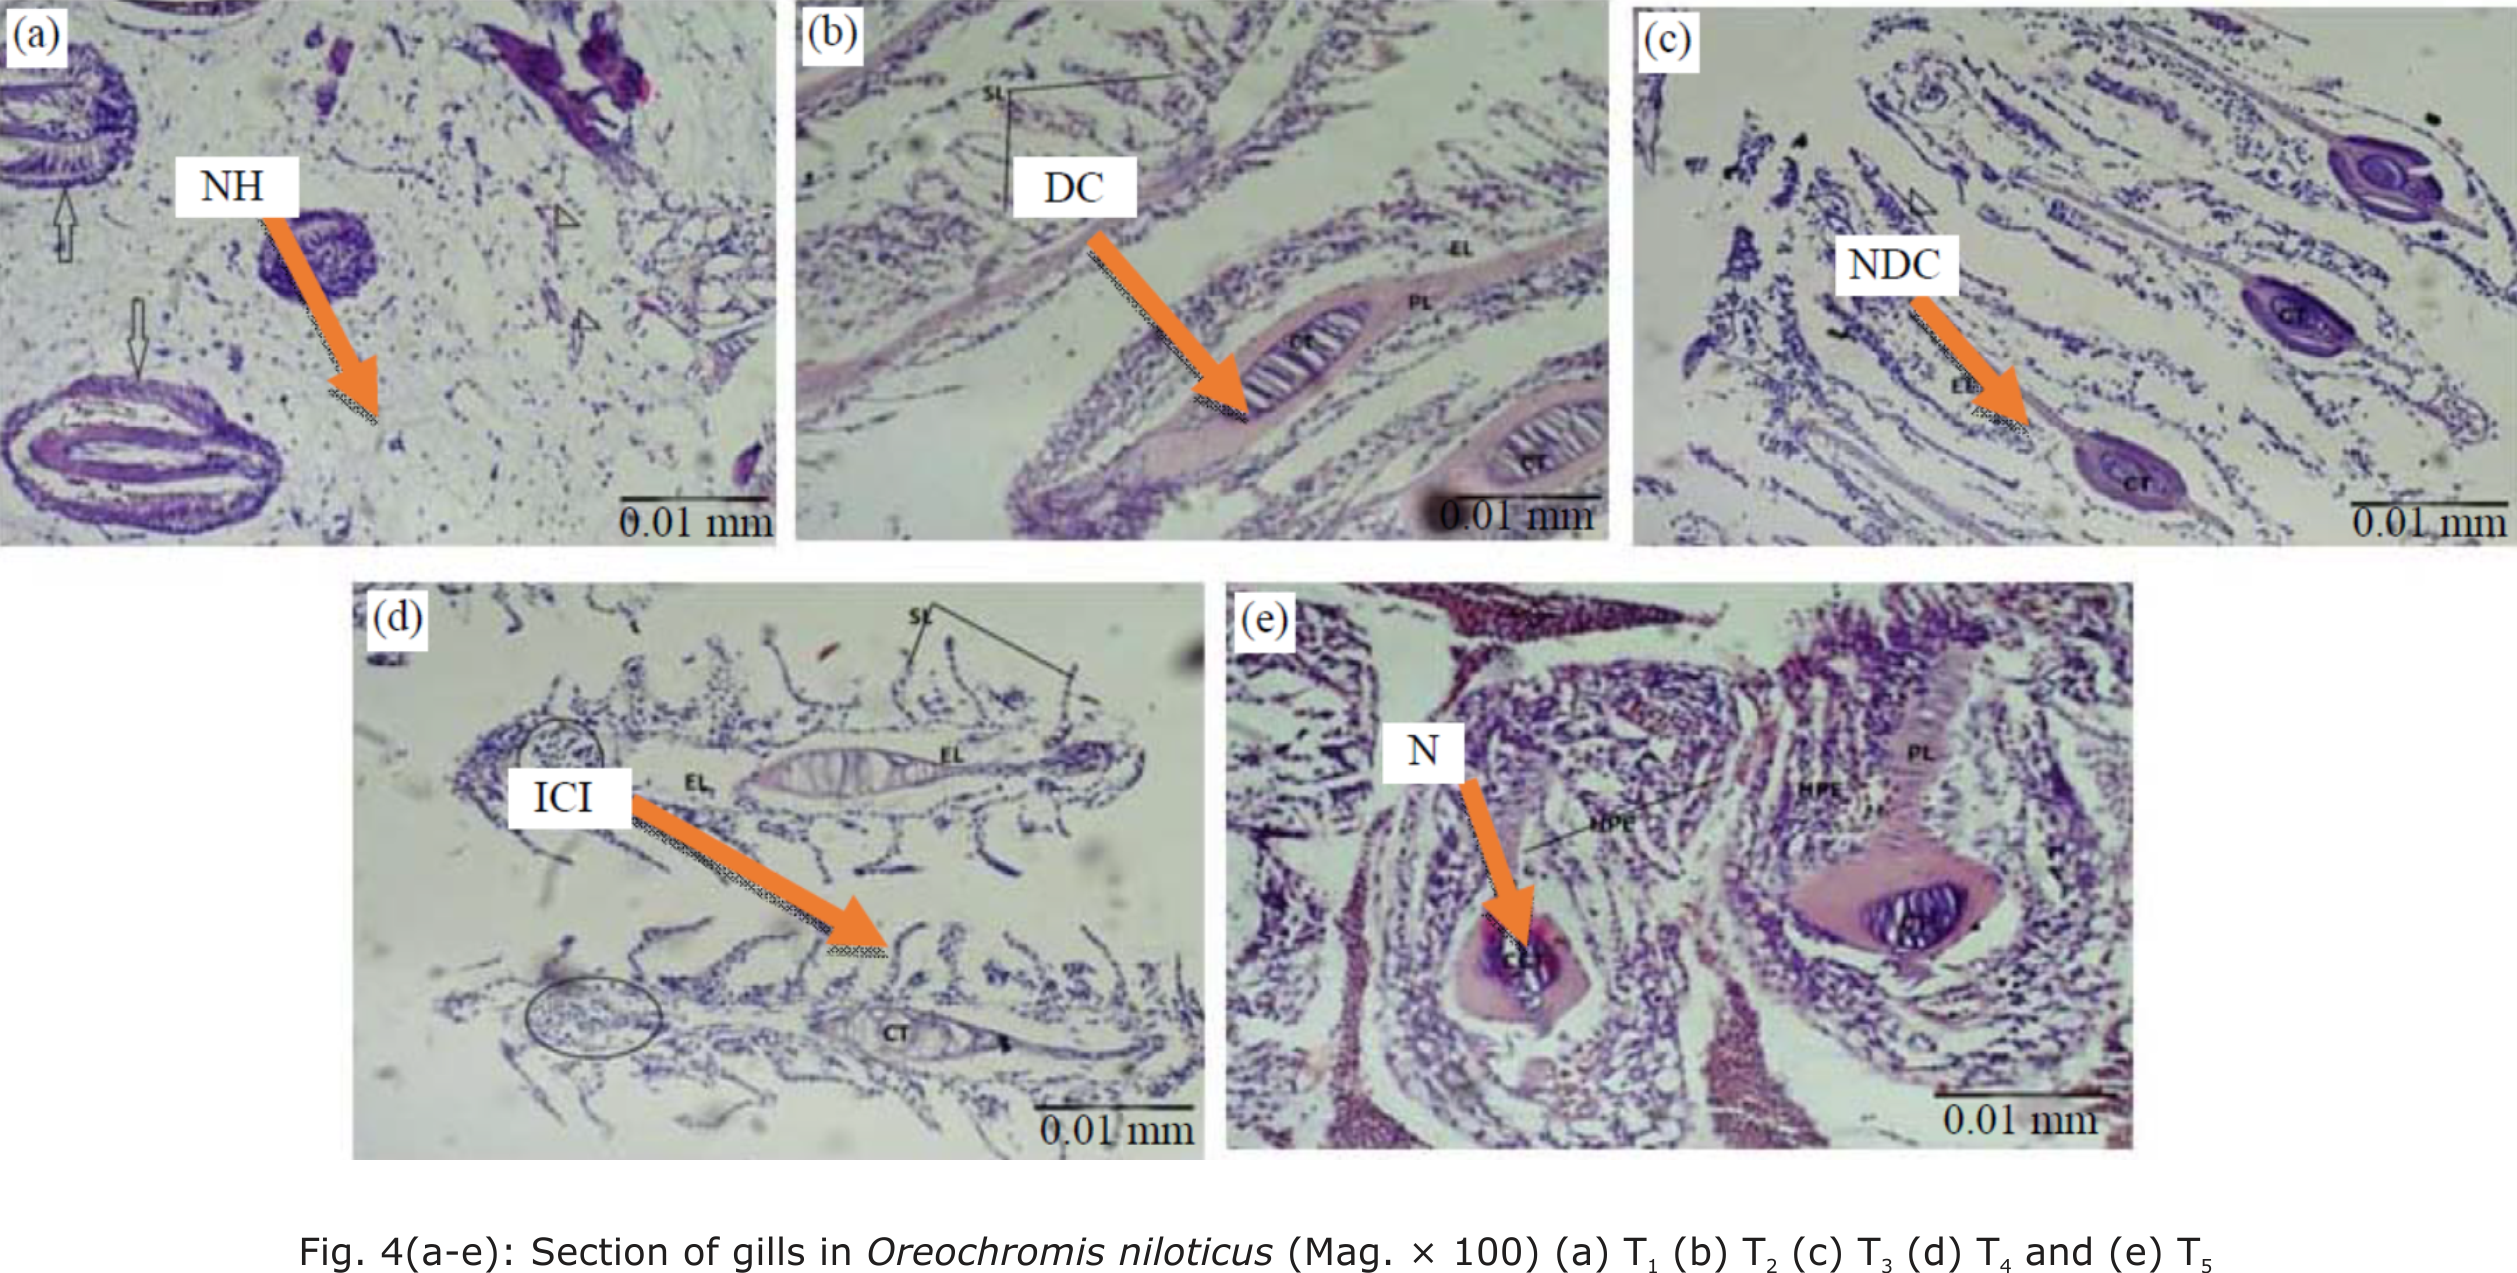 Fig. 4(a-e): Section of gills in <a href='https://ascidatabase.com/result.php?searchin=Keywords&cat=&ascicat=ALL&Submit=Search&keyword=Oreochromis+niloticus' target=_blank title='Find more articles at https://ascidatabase.com/result.php?searchin=Keywords&cat=&ascicat=ALL&Submit=Search&keyword=Oreochromis+niloticus (Oreochromis niloticus)'><strong>Oreochromis niloticus</strong></a> (Mag. �100) (a) T1, (b) T2, (c) T3, (d) T4 and (e) T5